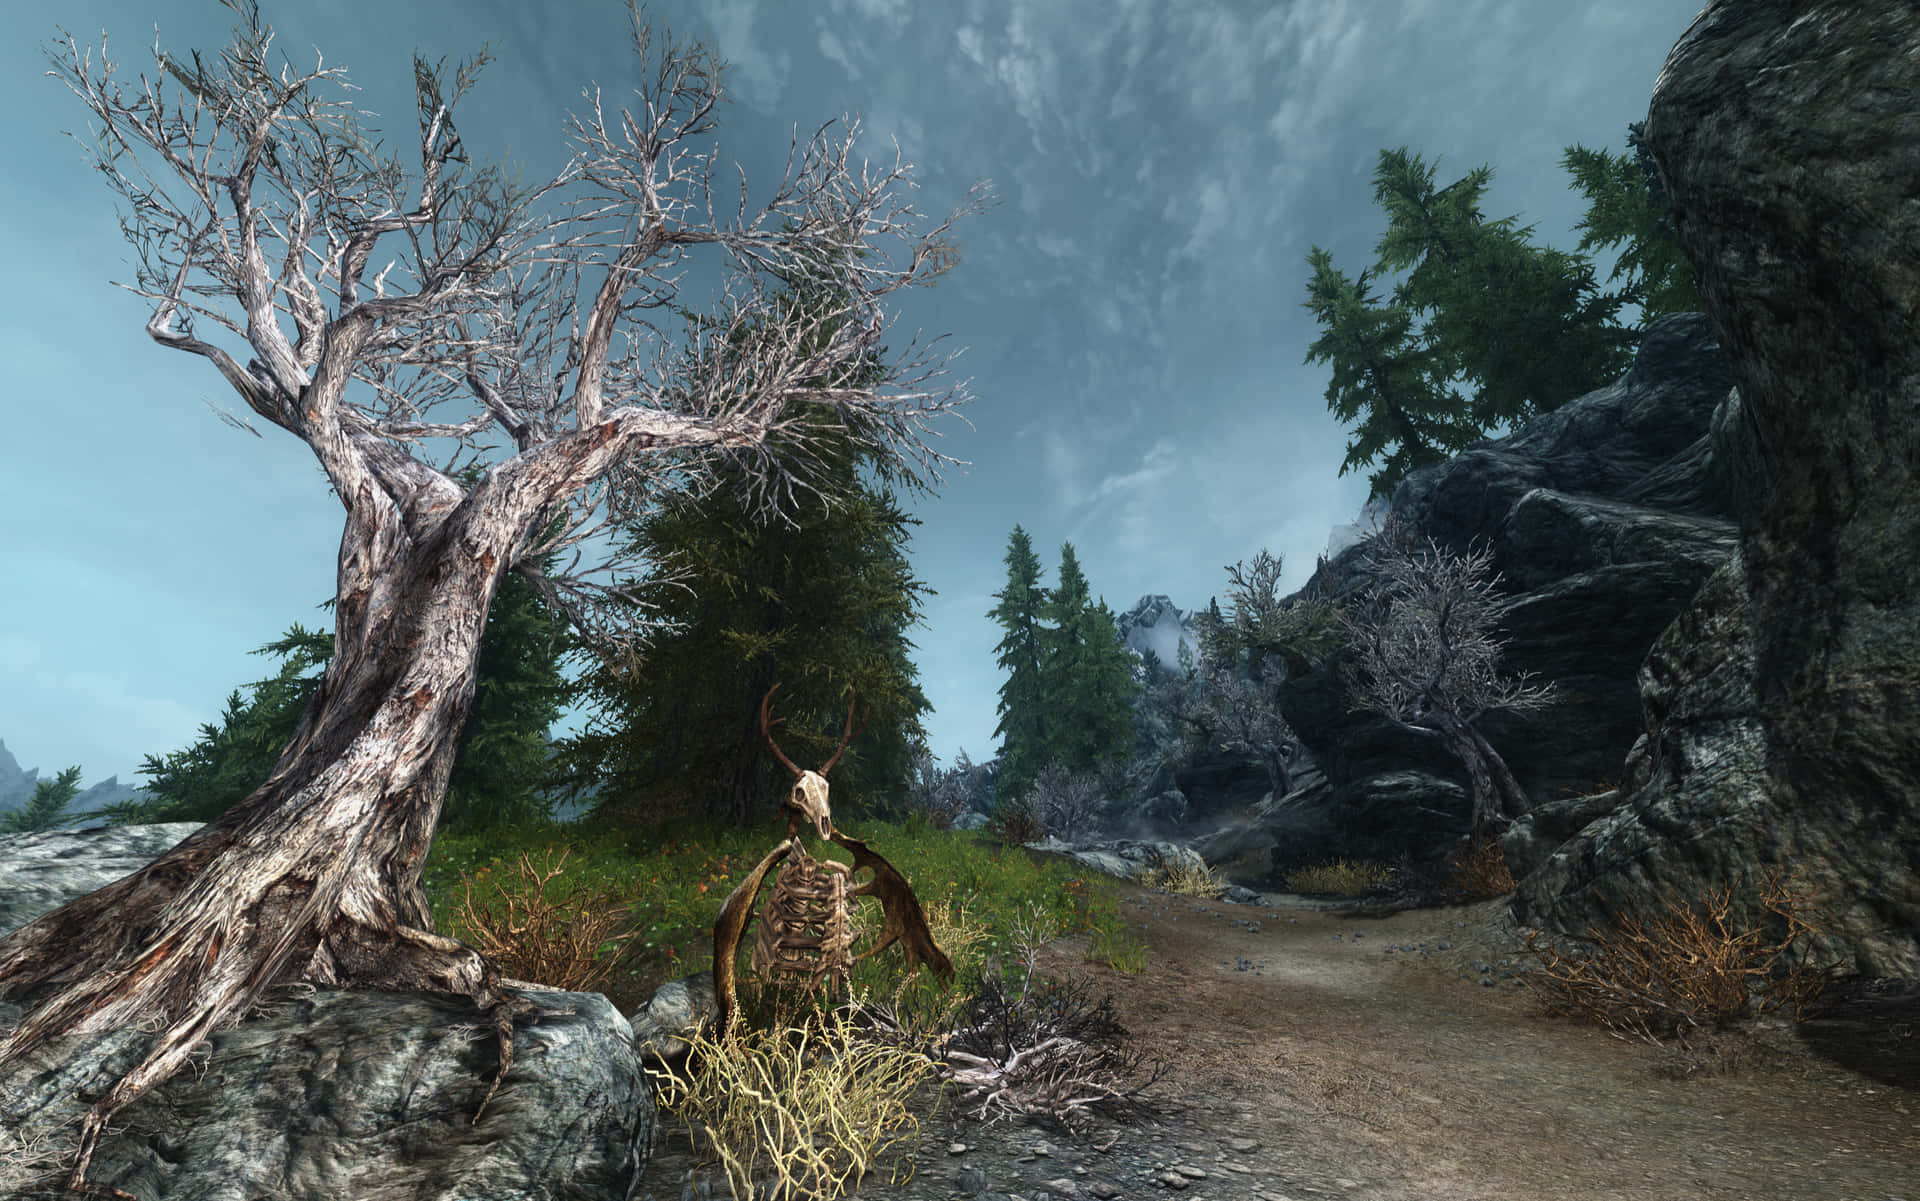 "A magical Skyrim landscape, full of endless mysteries and adventure." Wallpaper